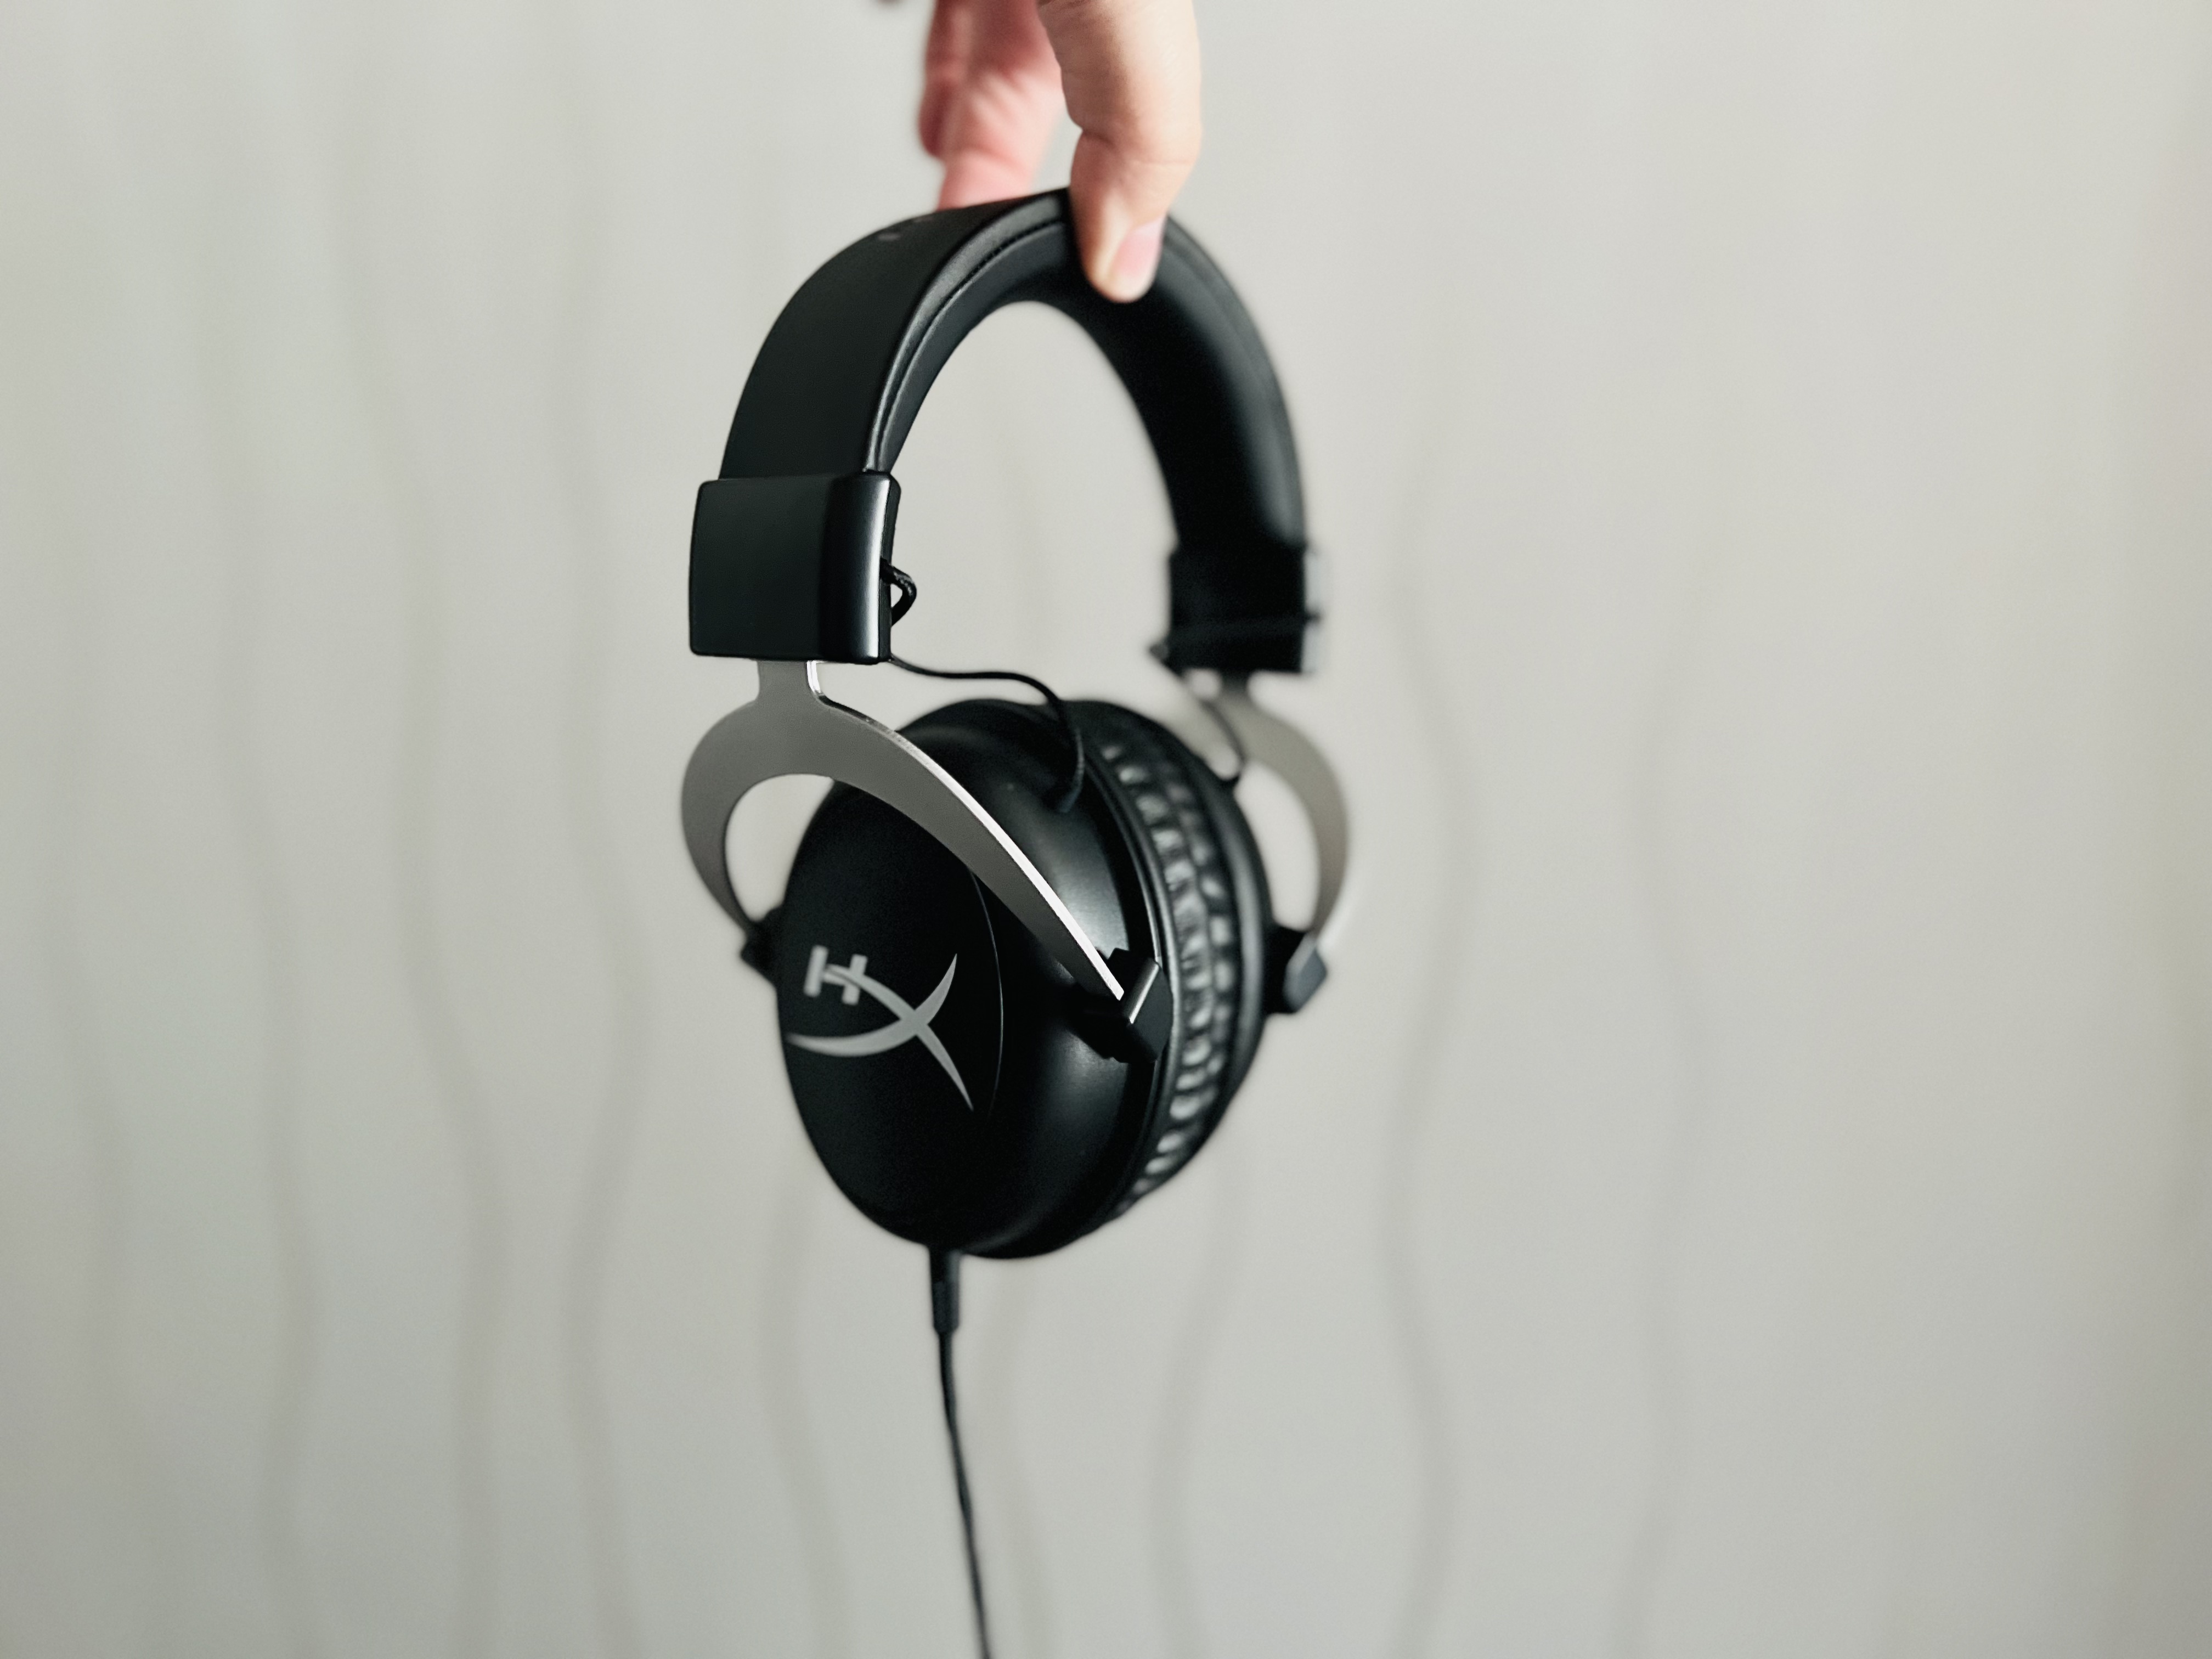 HyperX Computer Headsets for sale